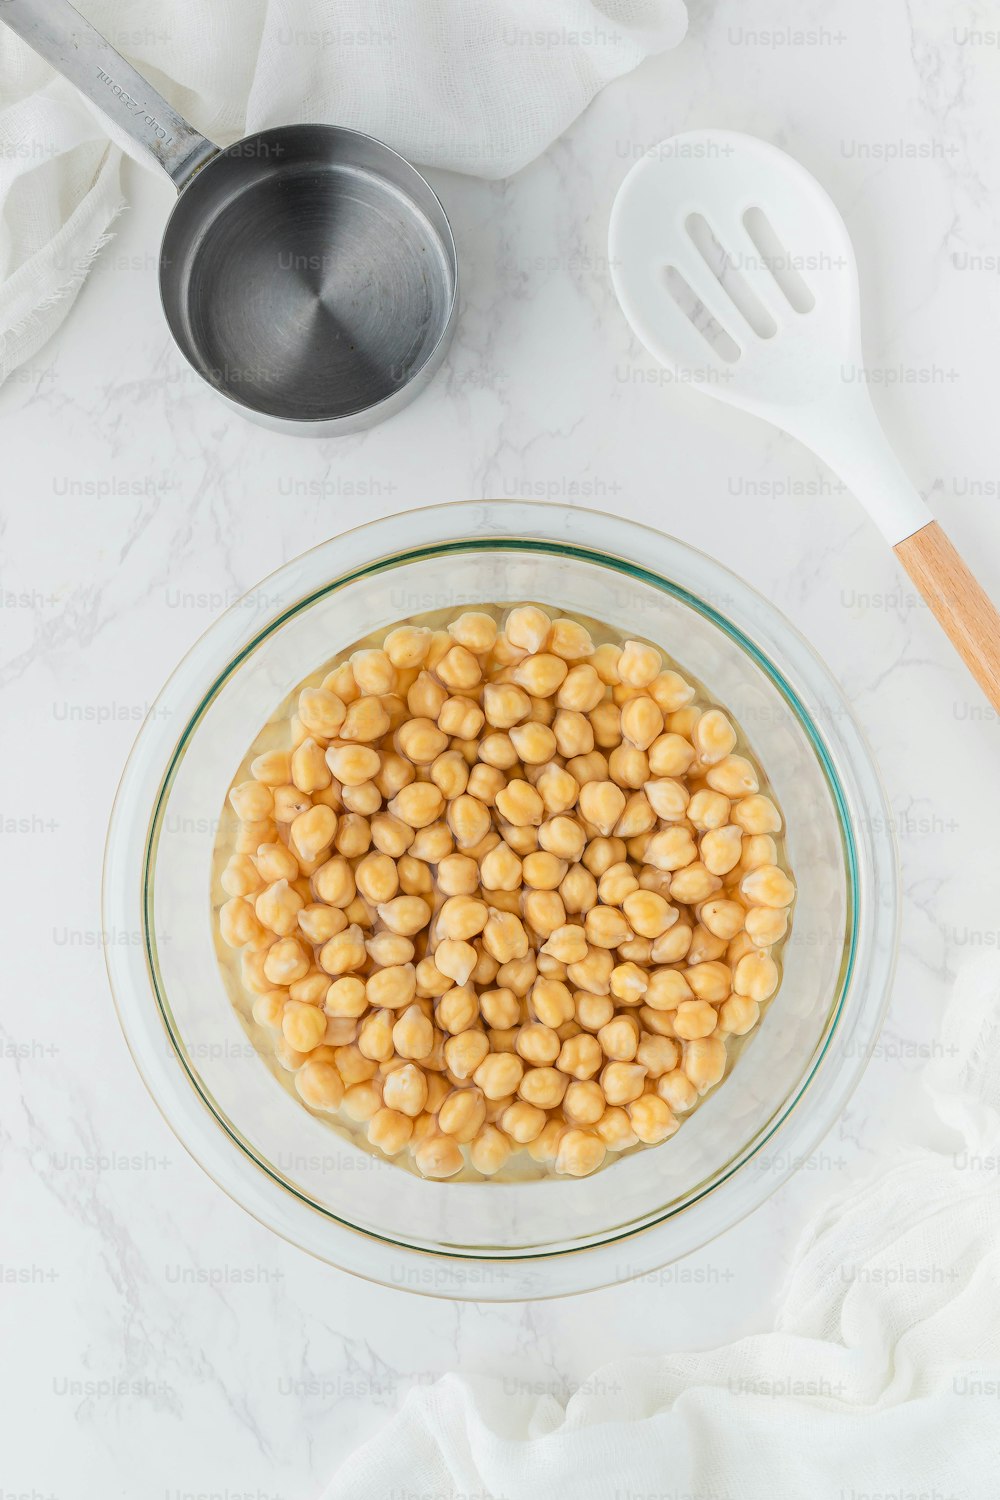 a bowl of chickpeas on a white table